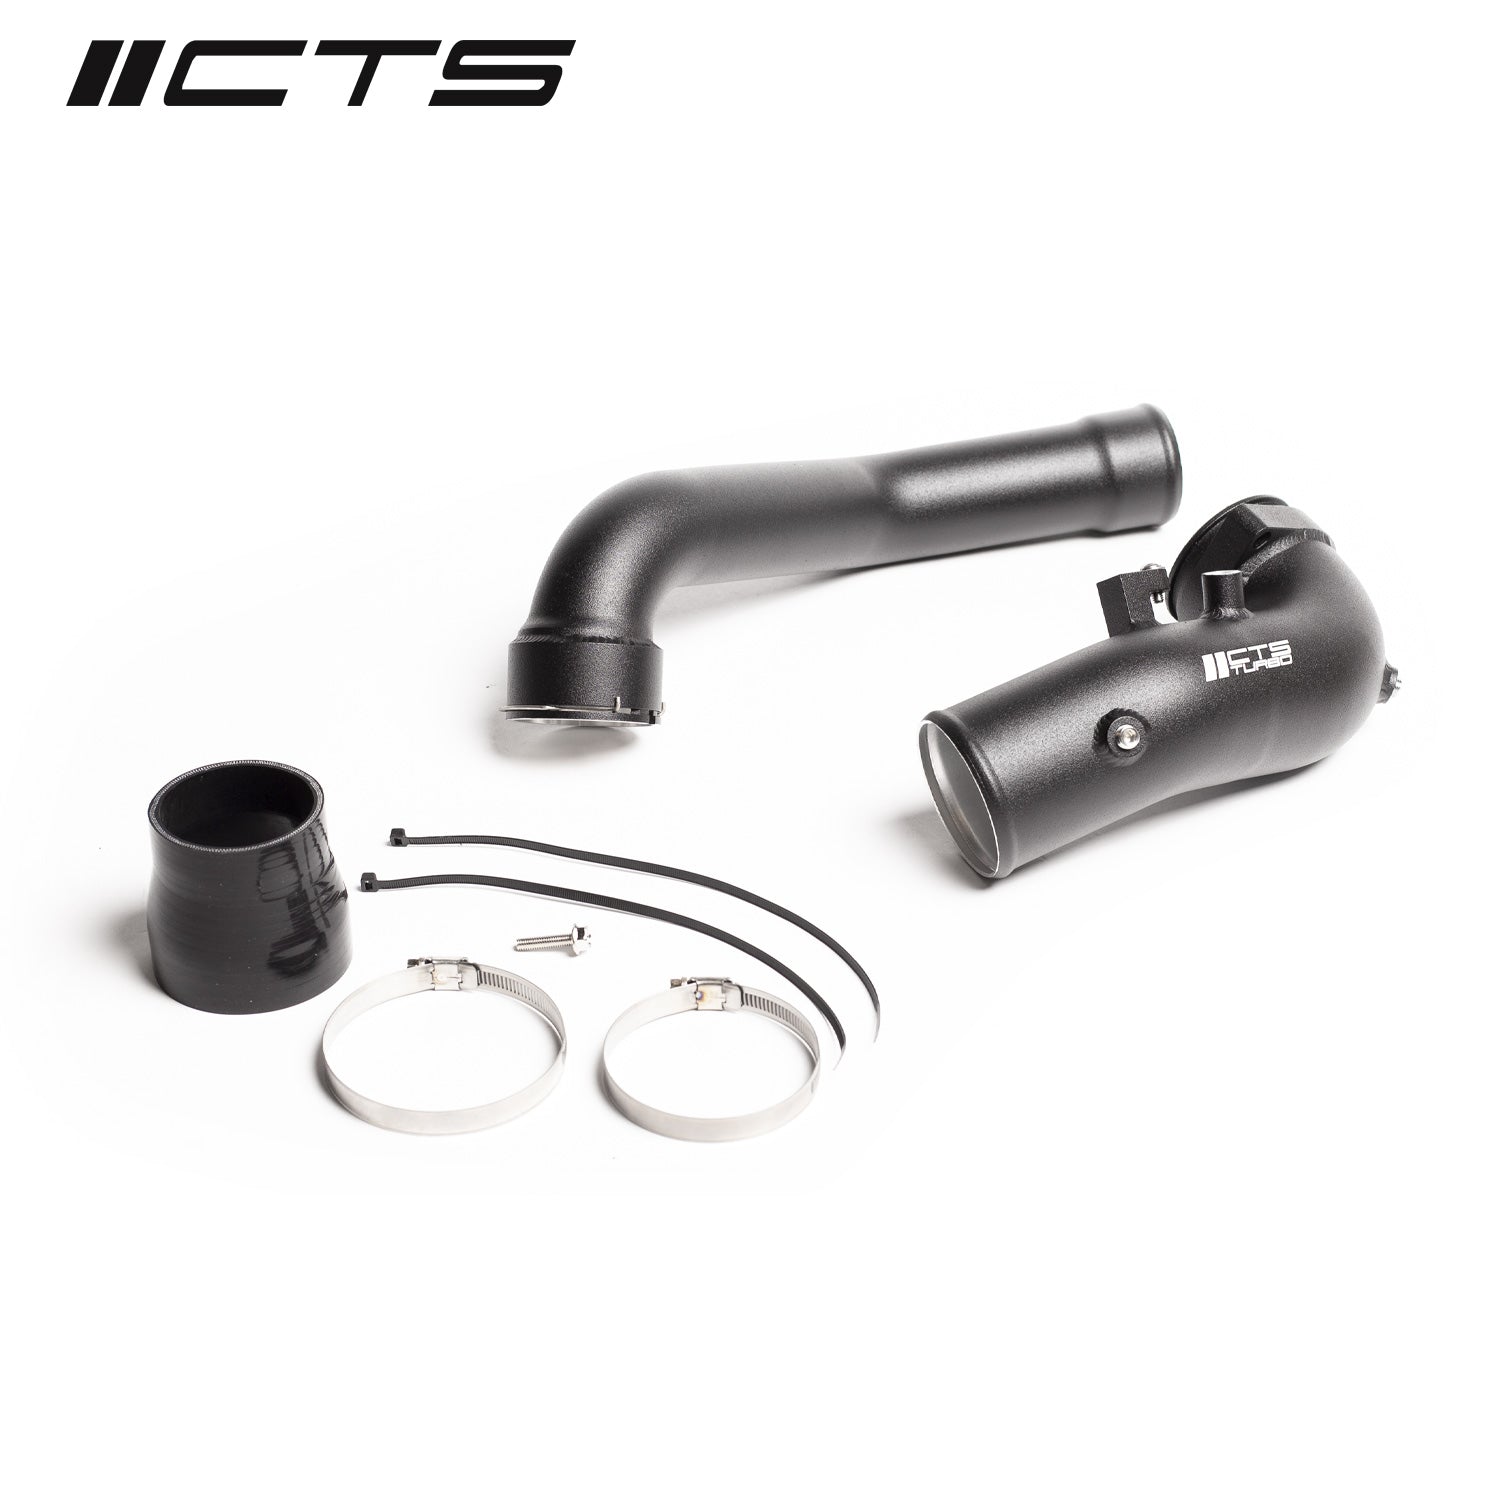 CTS TURBO CHARGE PIPE UPGRADE KIT FOR BMW G20/G29/G05/G07/G11 AND A90 TOYOTA SUPRA B58C 3.0L - 0